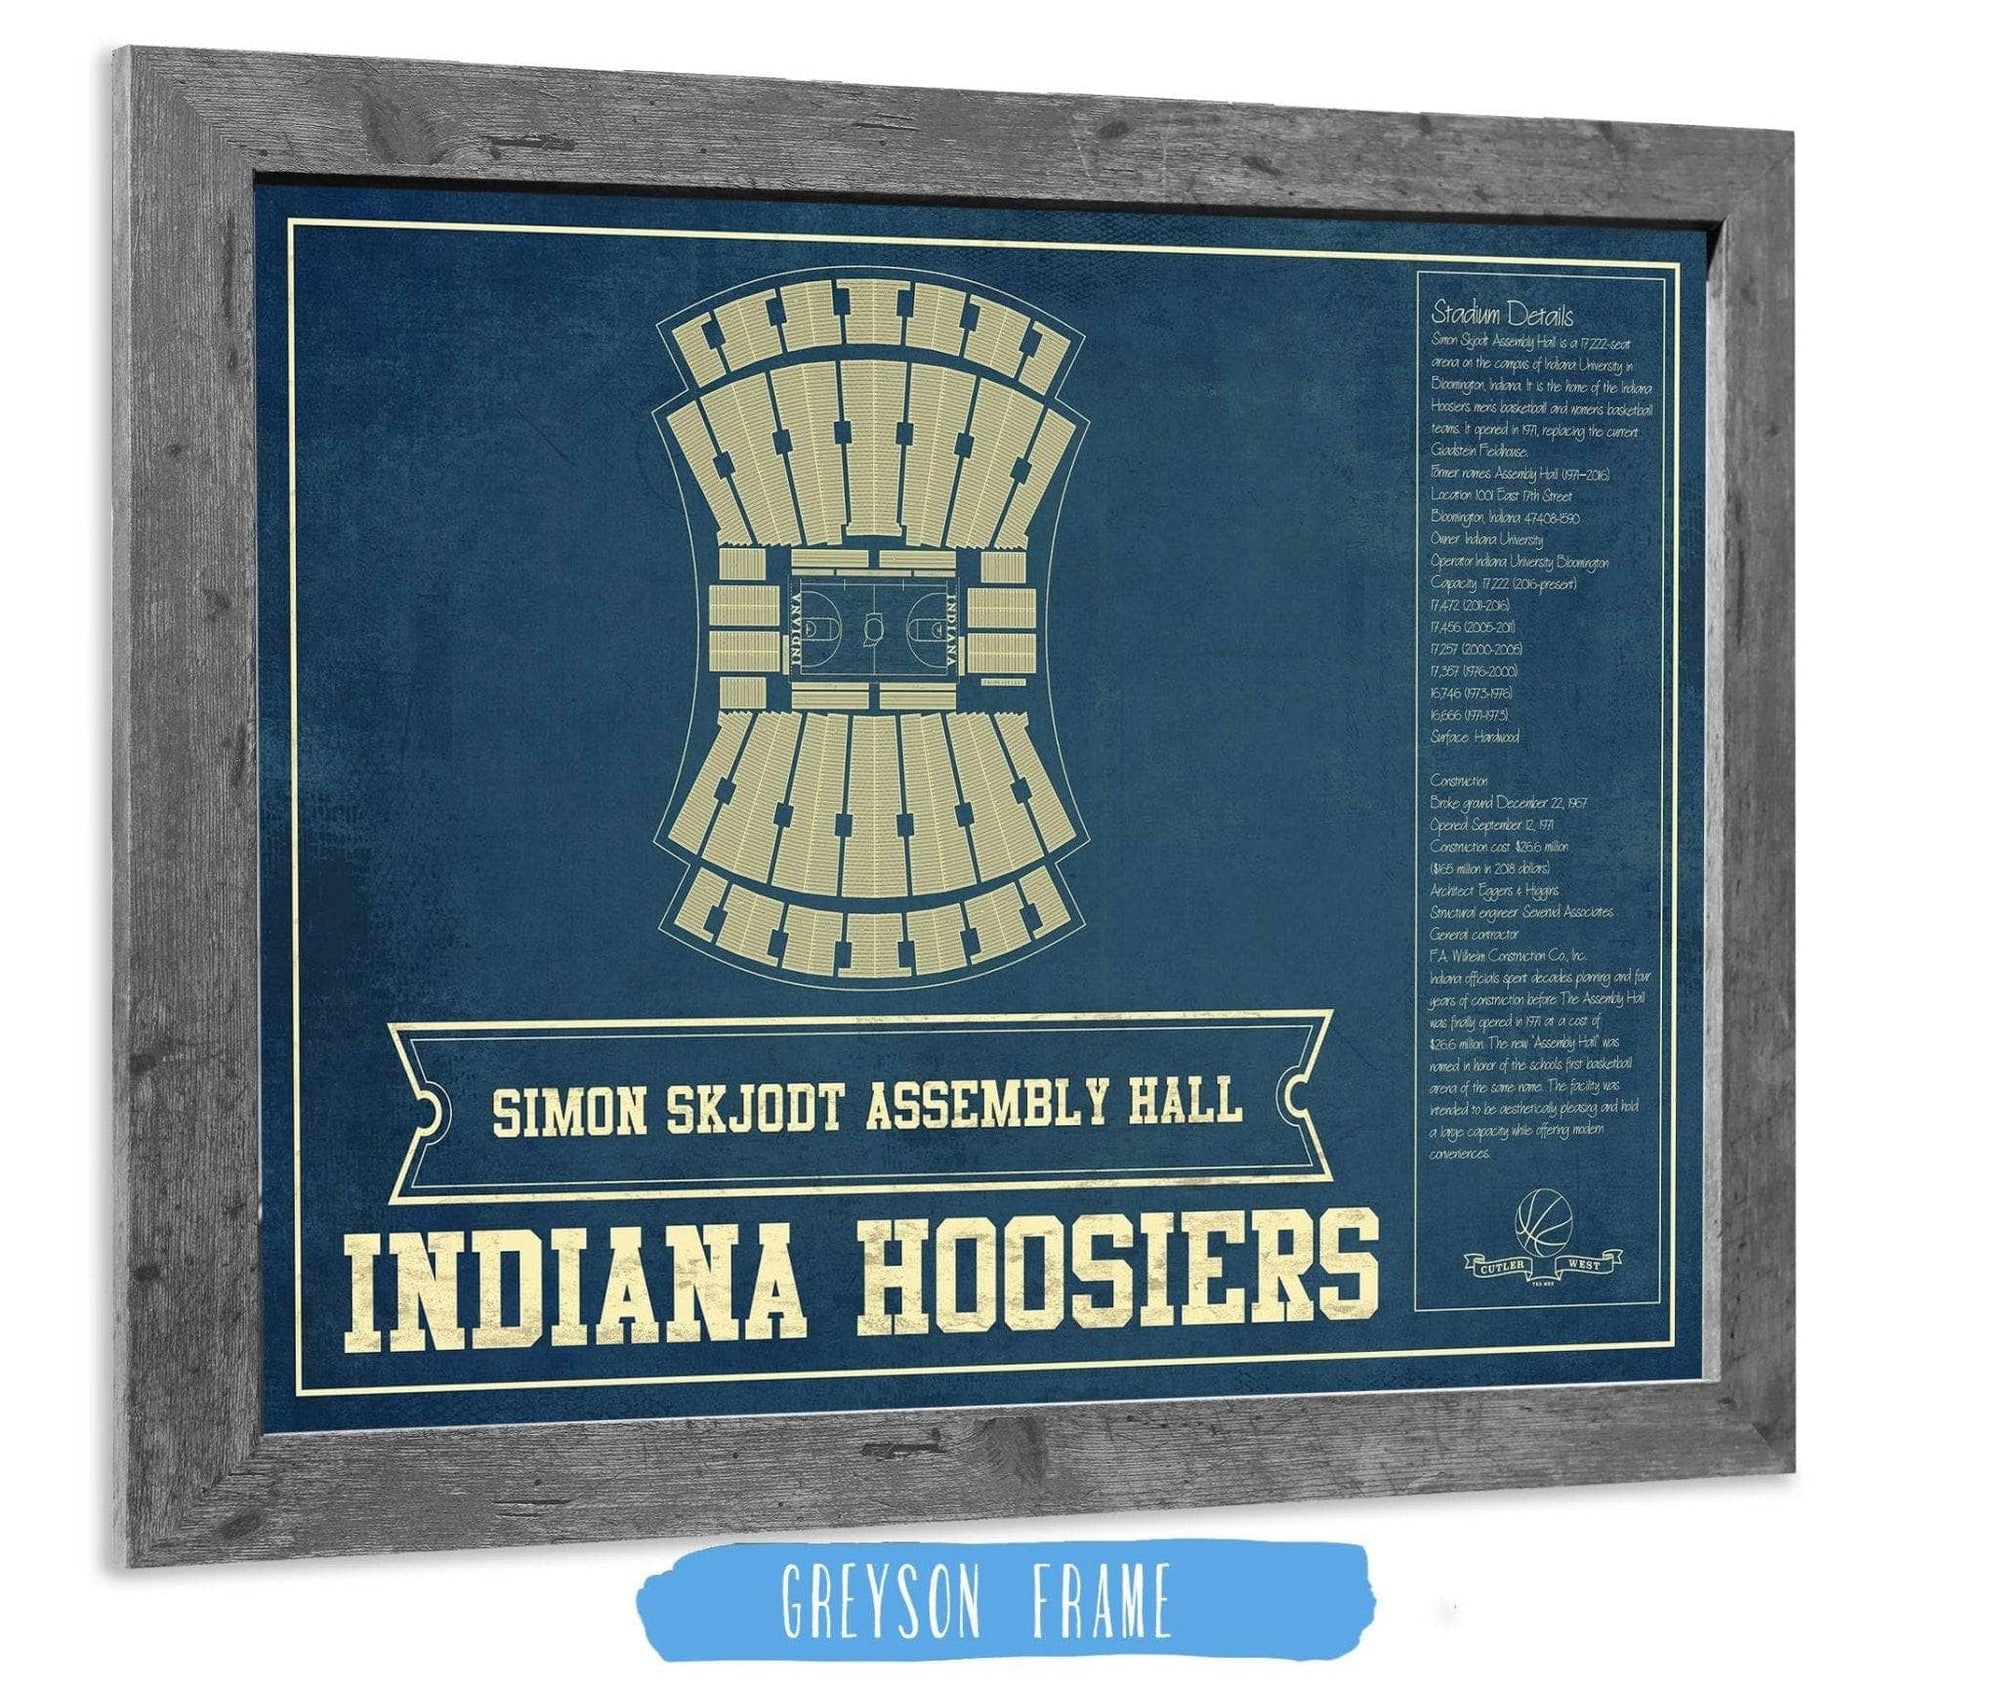 Cutler West Basketball Collection 14" x 11" / Greyson Frame Simon Skjodt Assembly Hall Indiana Hoosiers NCAA Vintage Print 933350231_83301